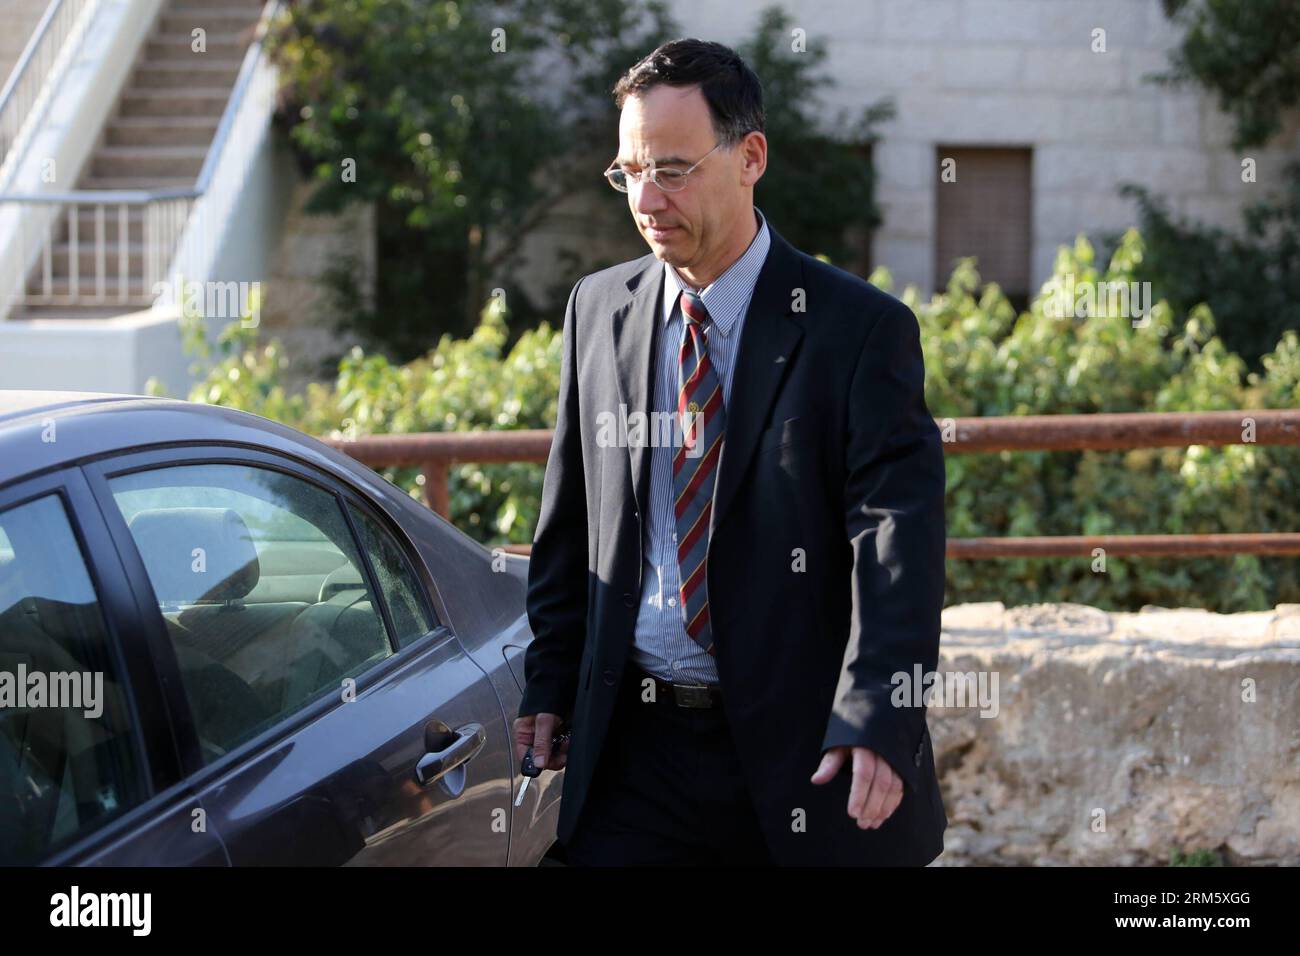 Bildnummer: 60732589  Datum: 19.11.2013  Copyright: imago/Xinhua (131119) -- JERUSALEM, Nov. 19, 2013 (Xinhua) -- Deputy Attorney General Shai Nitzan walks toward his car near his home in Jerusalem, on Nov. 19, 2013. A search panel appointed by the Israeli Justice Minister announced on Tuesday that Deputy Attorney General Shai Nitzan was selected as a candidate for the next state prosecutor, according to a statement released by the ministry. Nitzan, 54, was nominated alone with three other candidates. He told the Ynet news website that it is a great honor to be selected for the post. (Xinhua/J Stock Photo